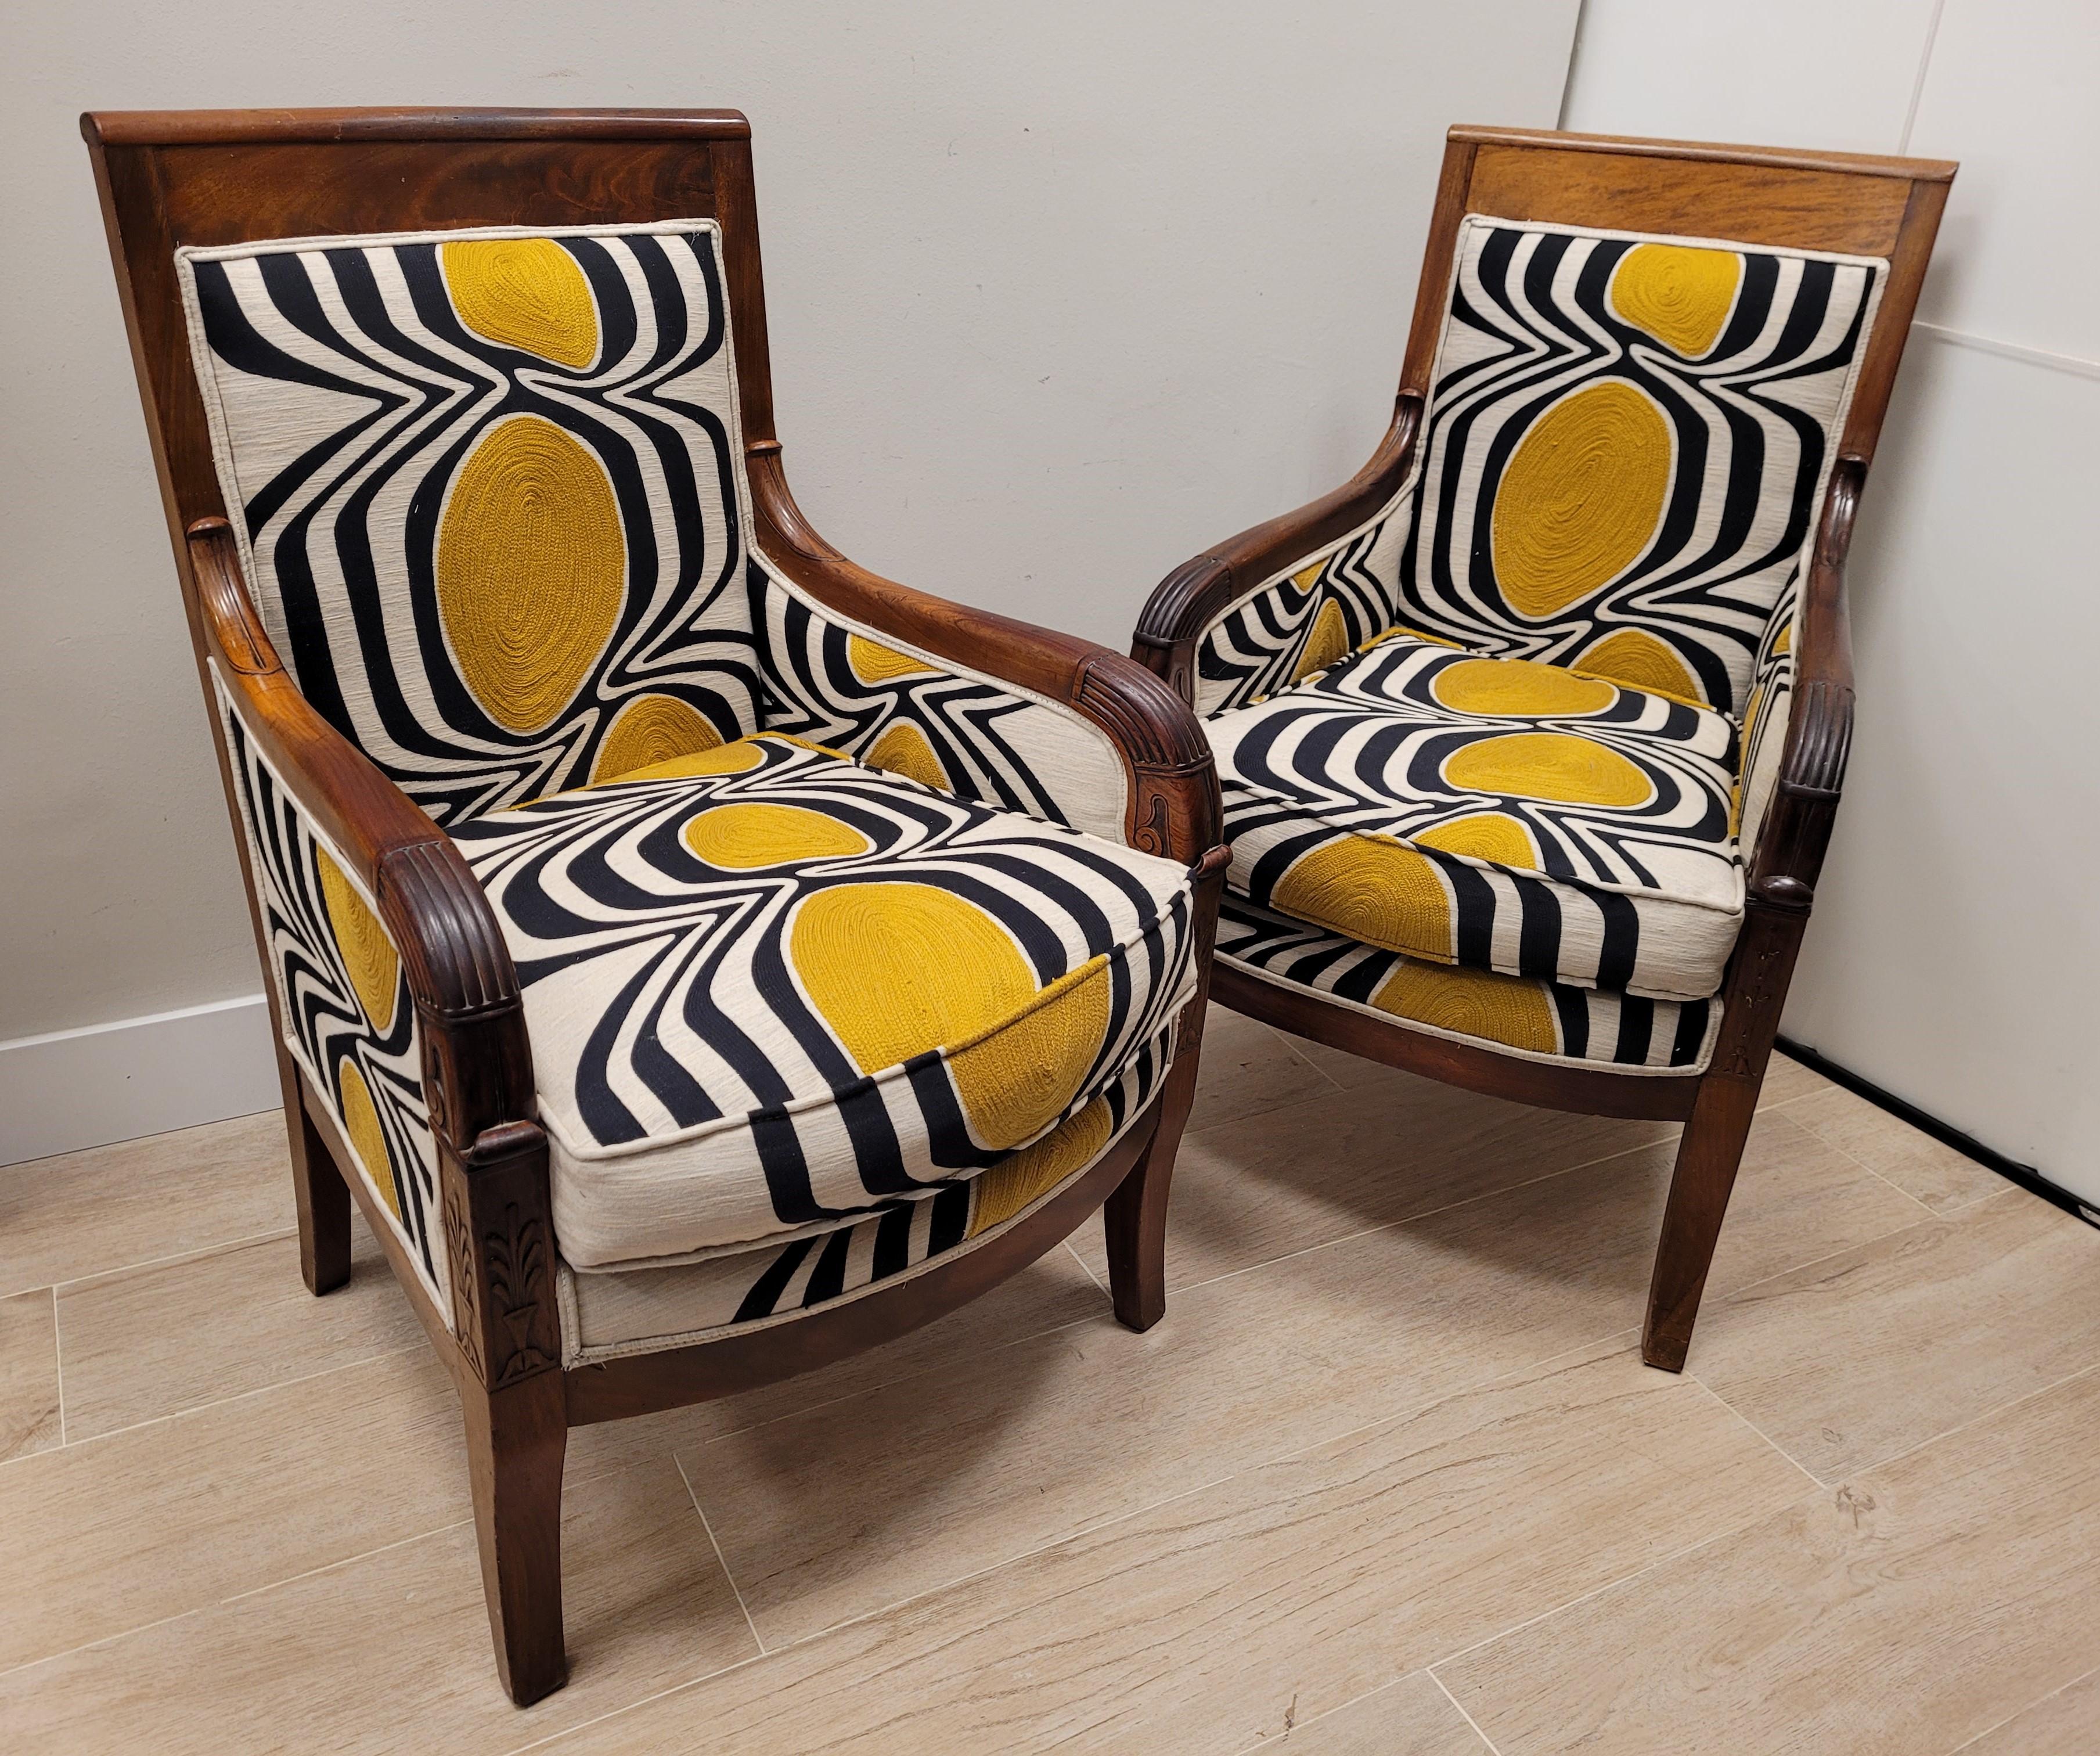 Out stunning pair of French Louis Philippe style armchairs, made of carved walnut wood. Its design highlights the simple, straight lines, slightly rounded in some details. The main characteristic of this style is elegance, but discreet and